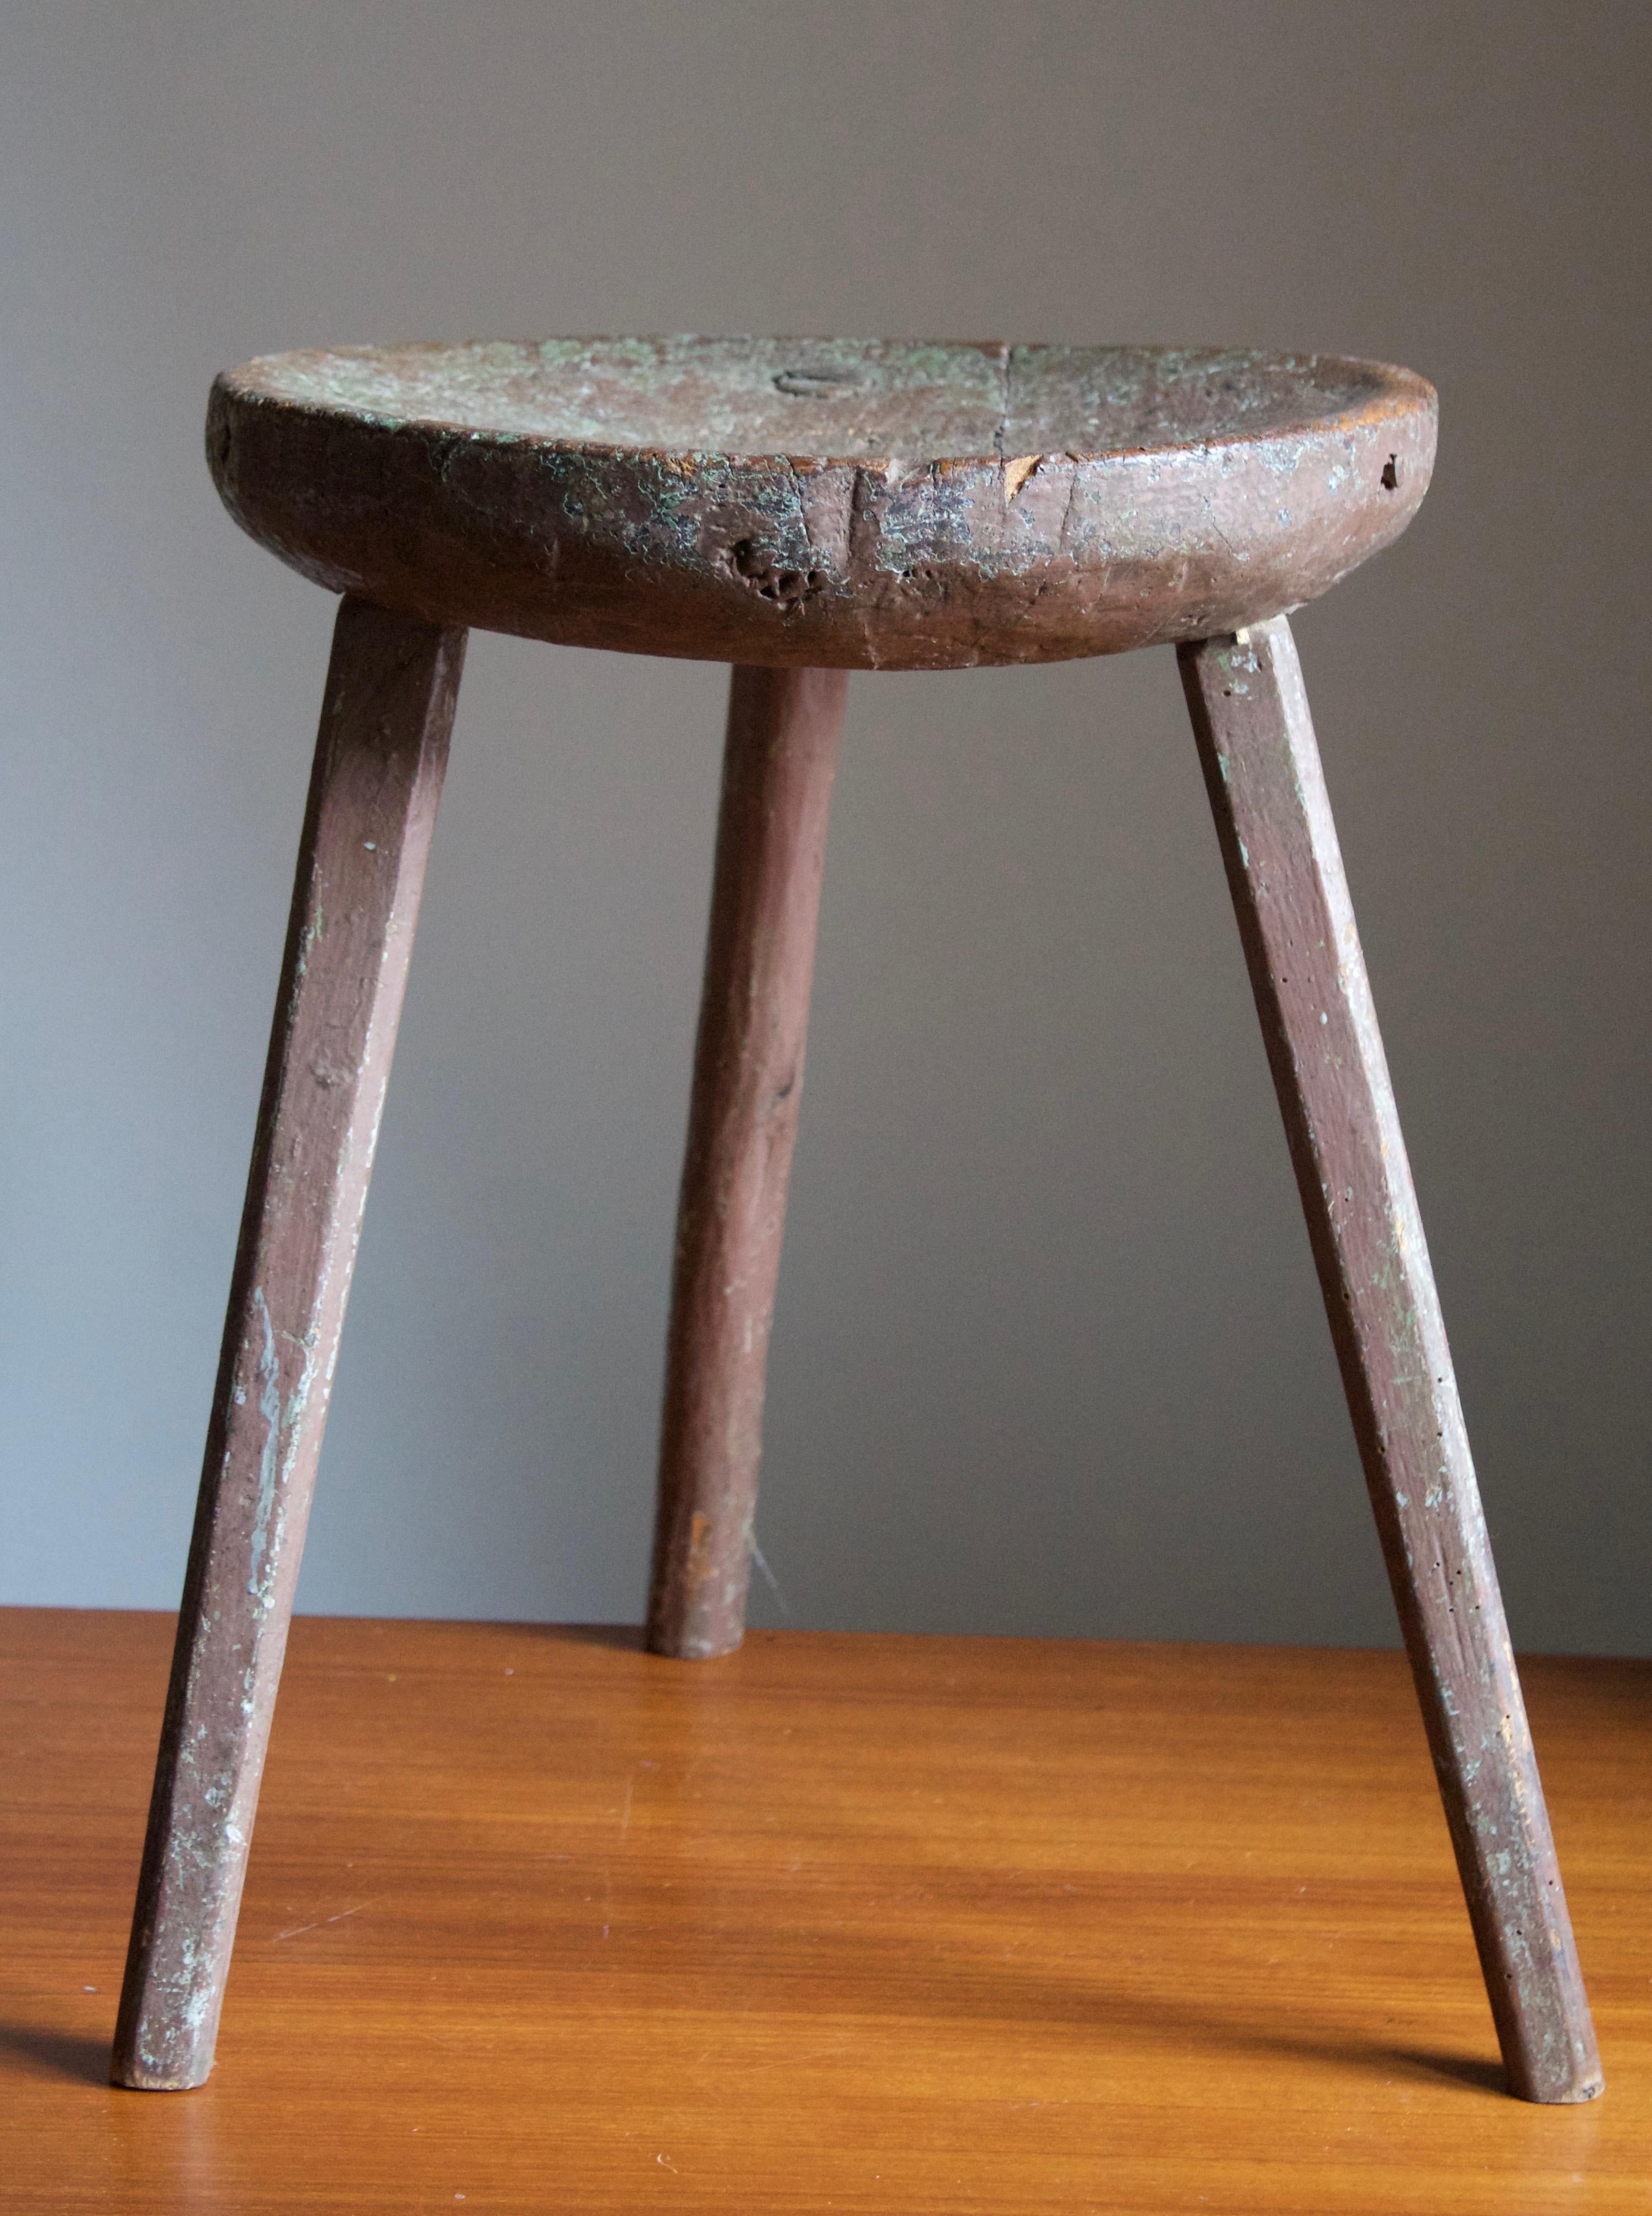 A carved stool. In brown-painted wood. Features carved wood and revealed joinery. In untouched original condition.